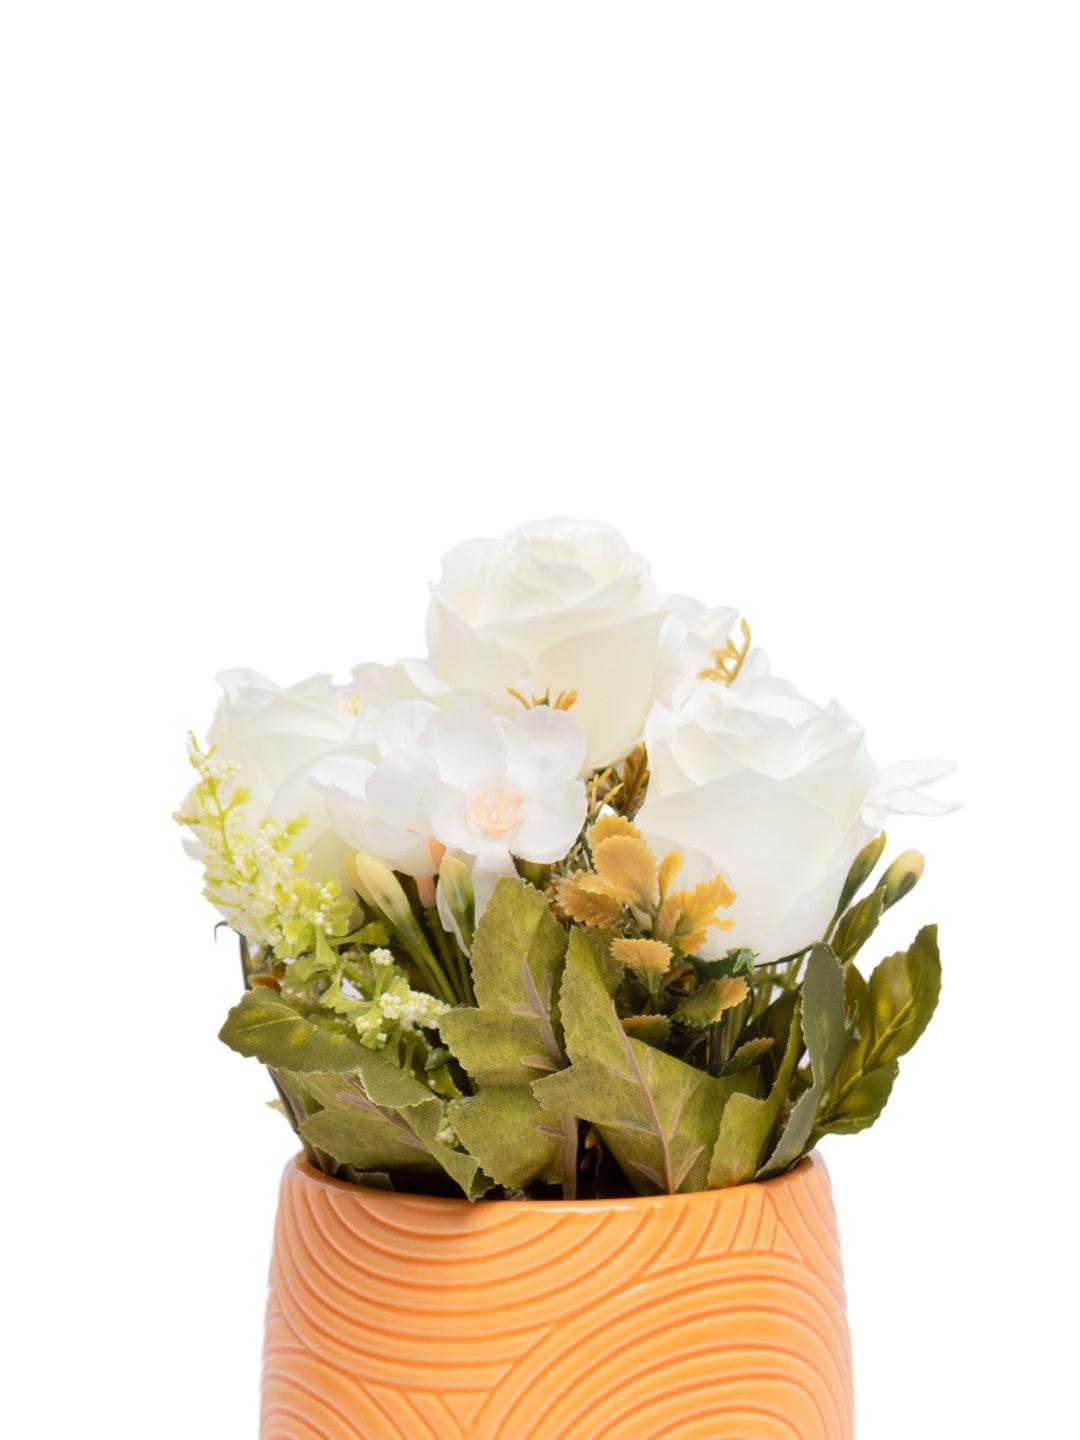 White Roses With Brown Pot - MARKET 99